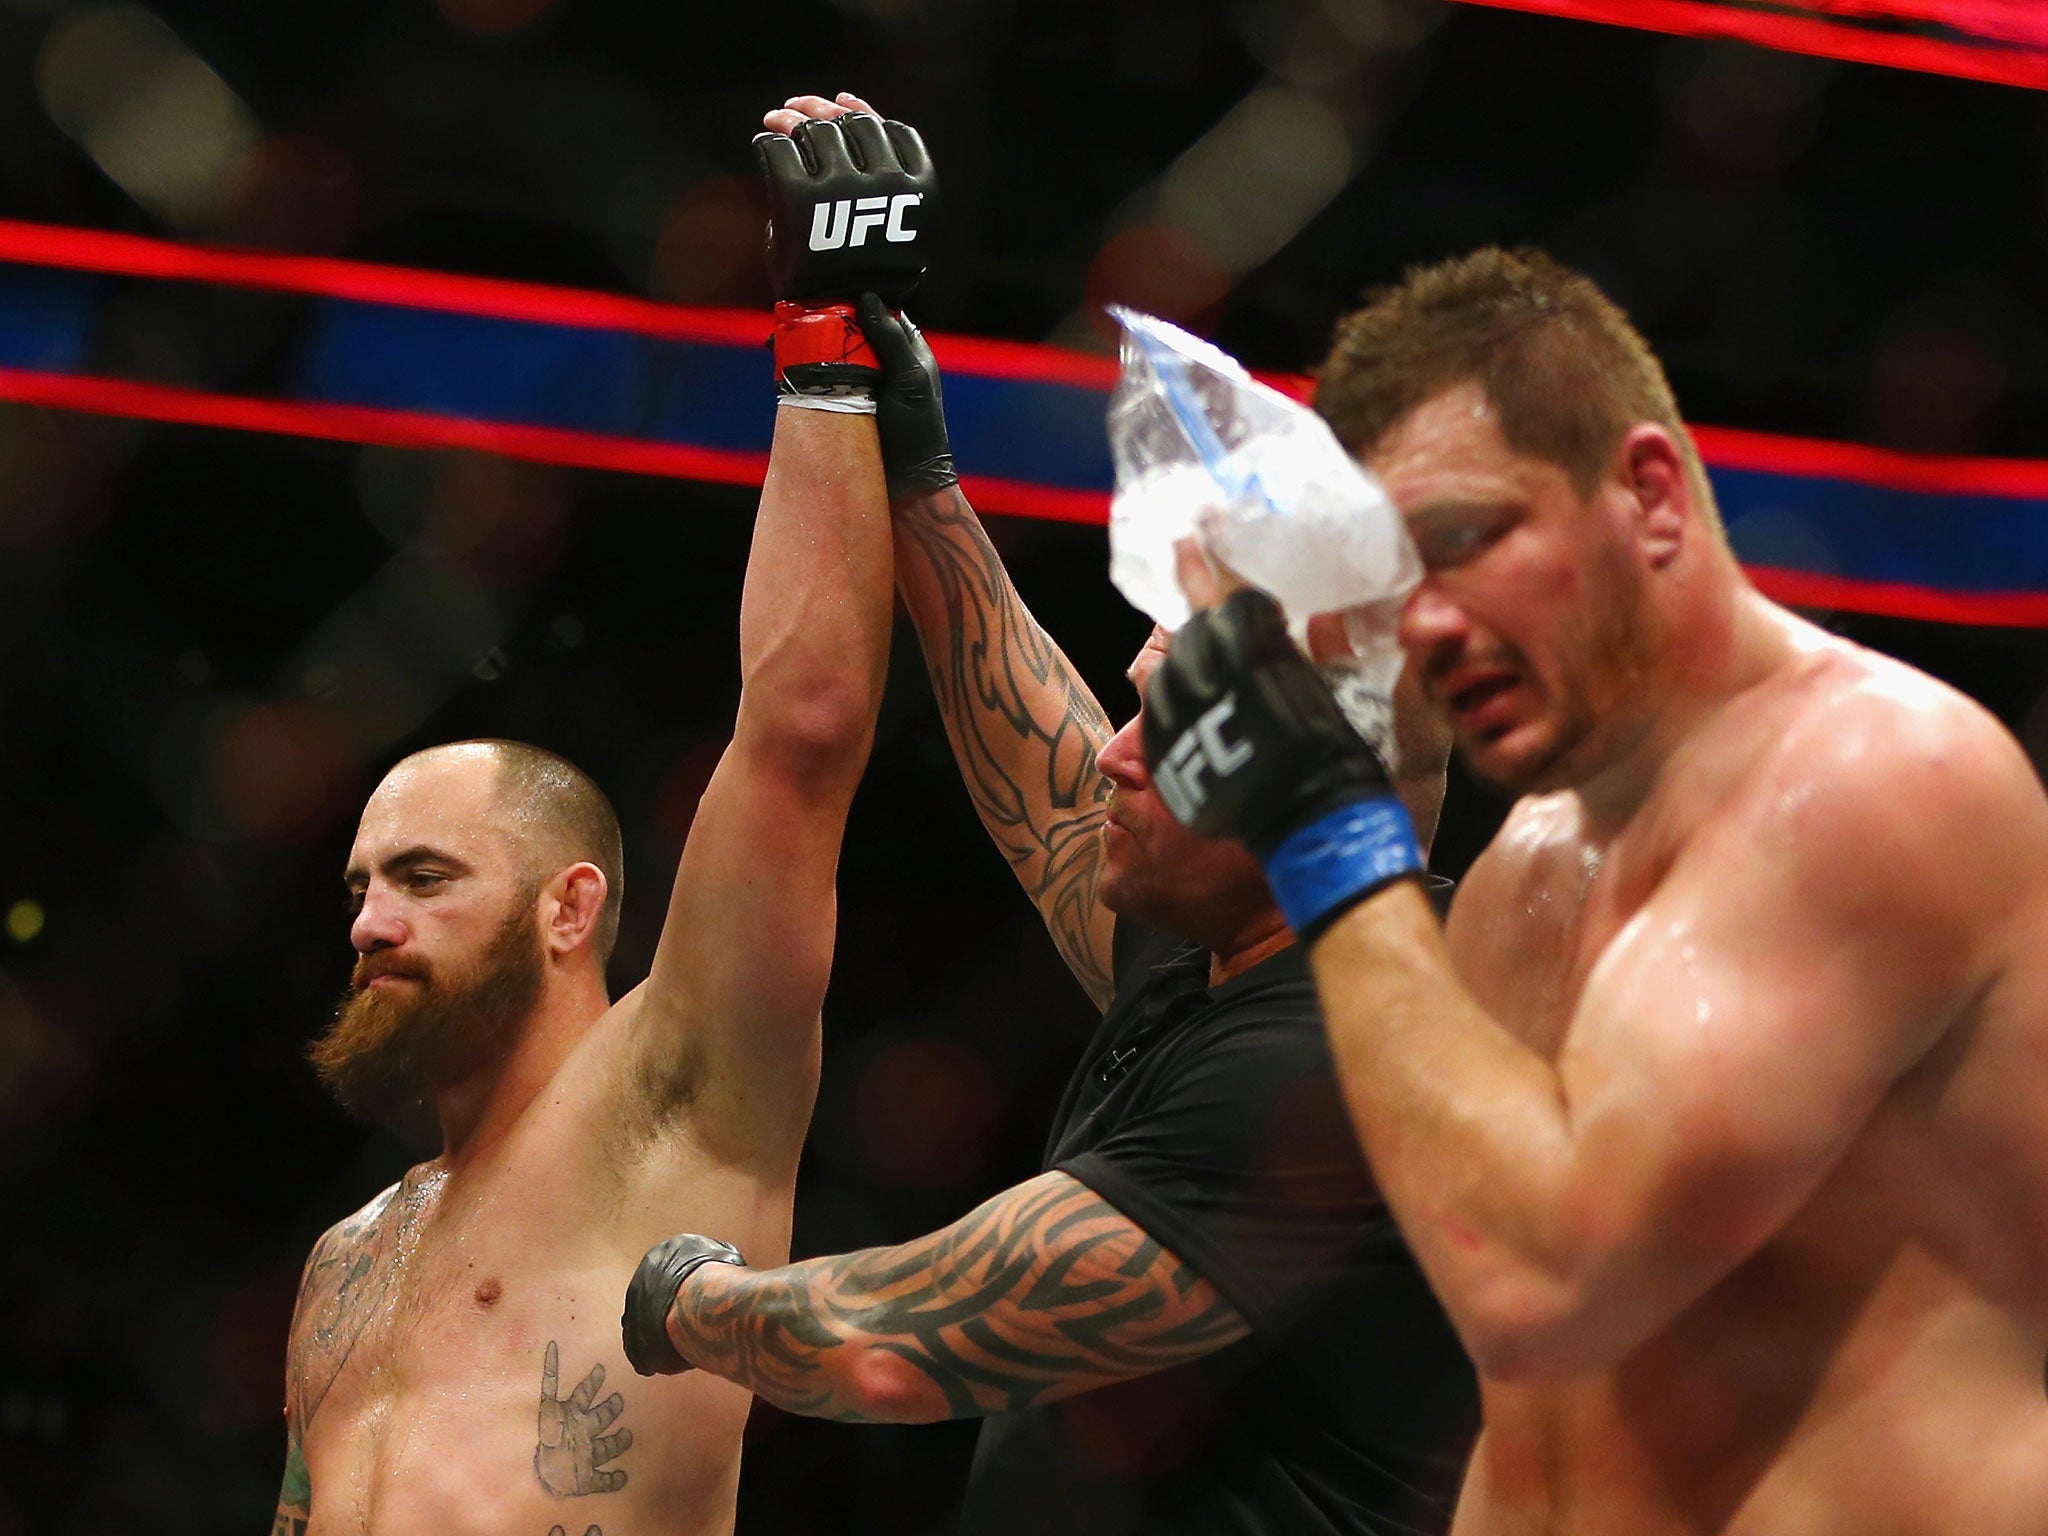 Browne's hand is raised in victory as Mitrione ices his right eye